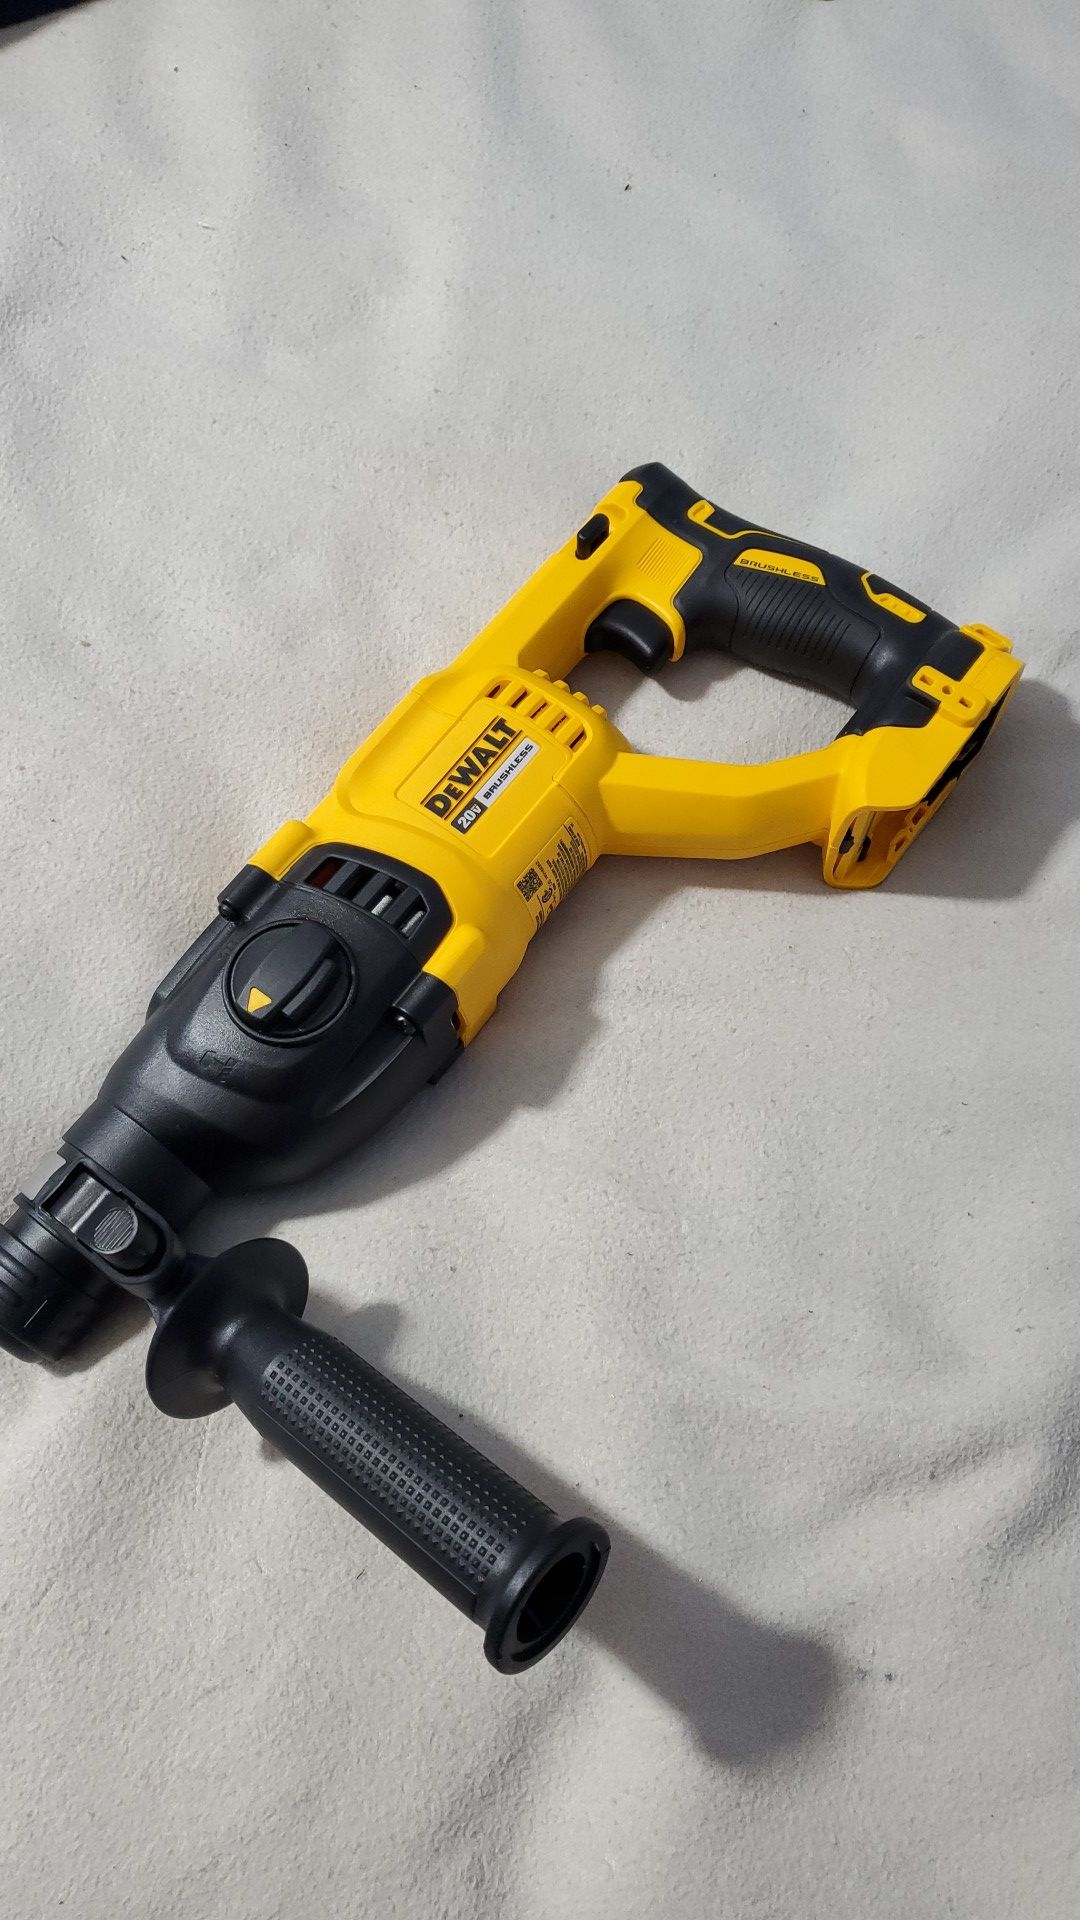 Dewalt 20V Max Brushless SDS Plus Hammer Drill. Brand new. Tool Only. Price is firm